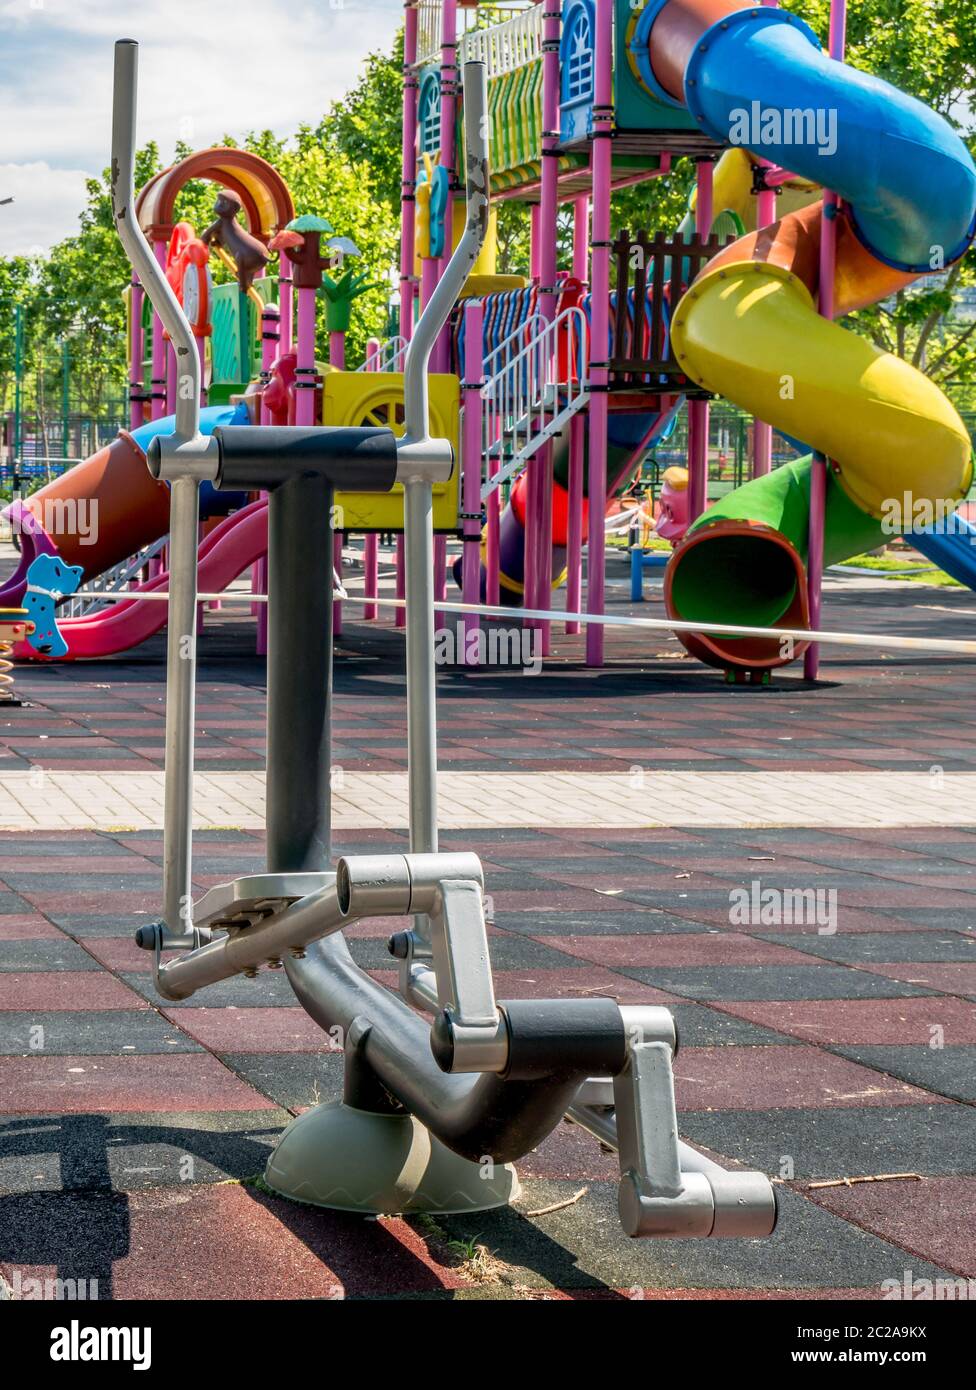 Eliptic bicycle or cross trainer fitness equipment in public park in Bucharest, Romania. Stock Photo